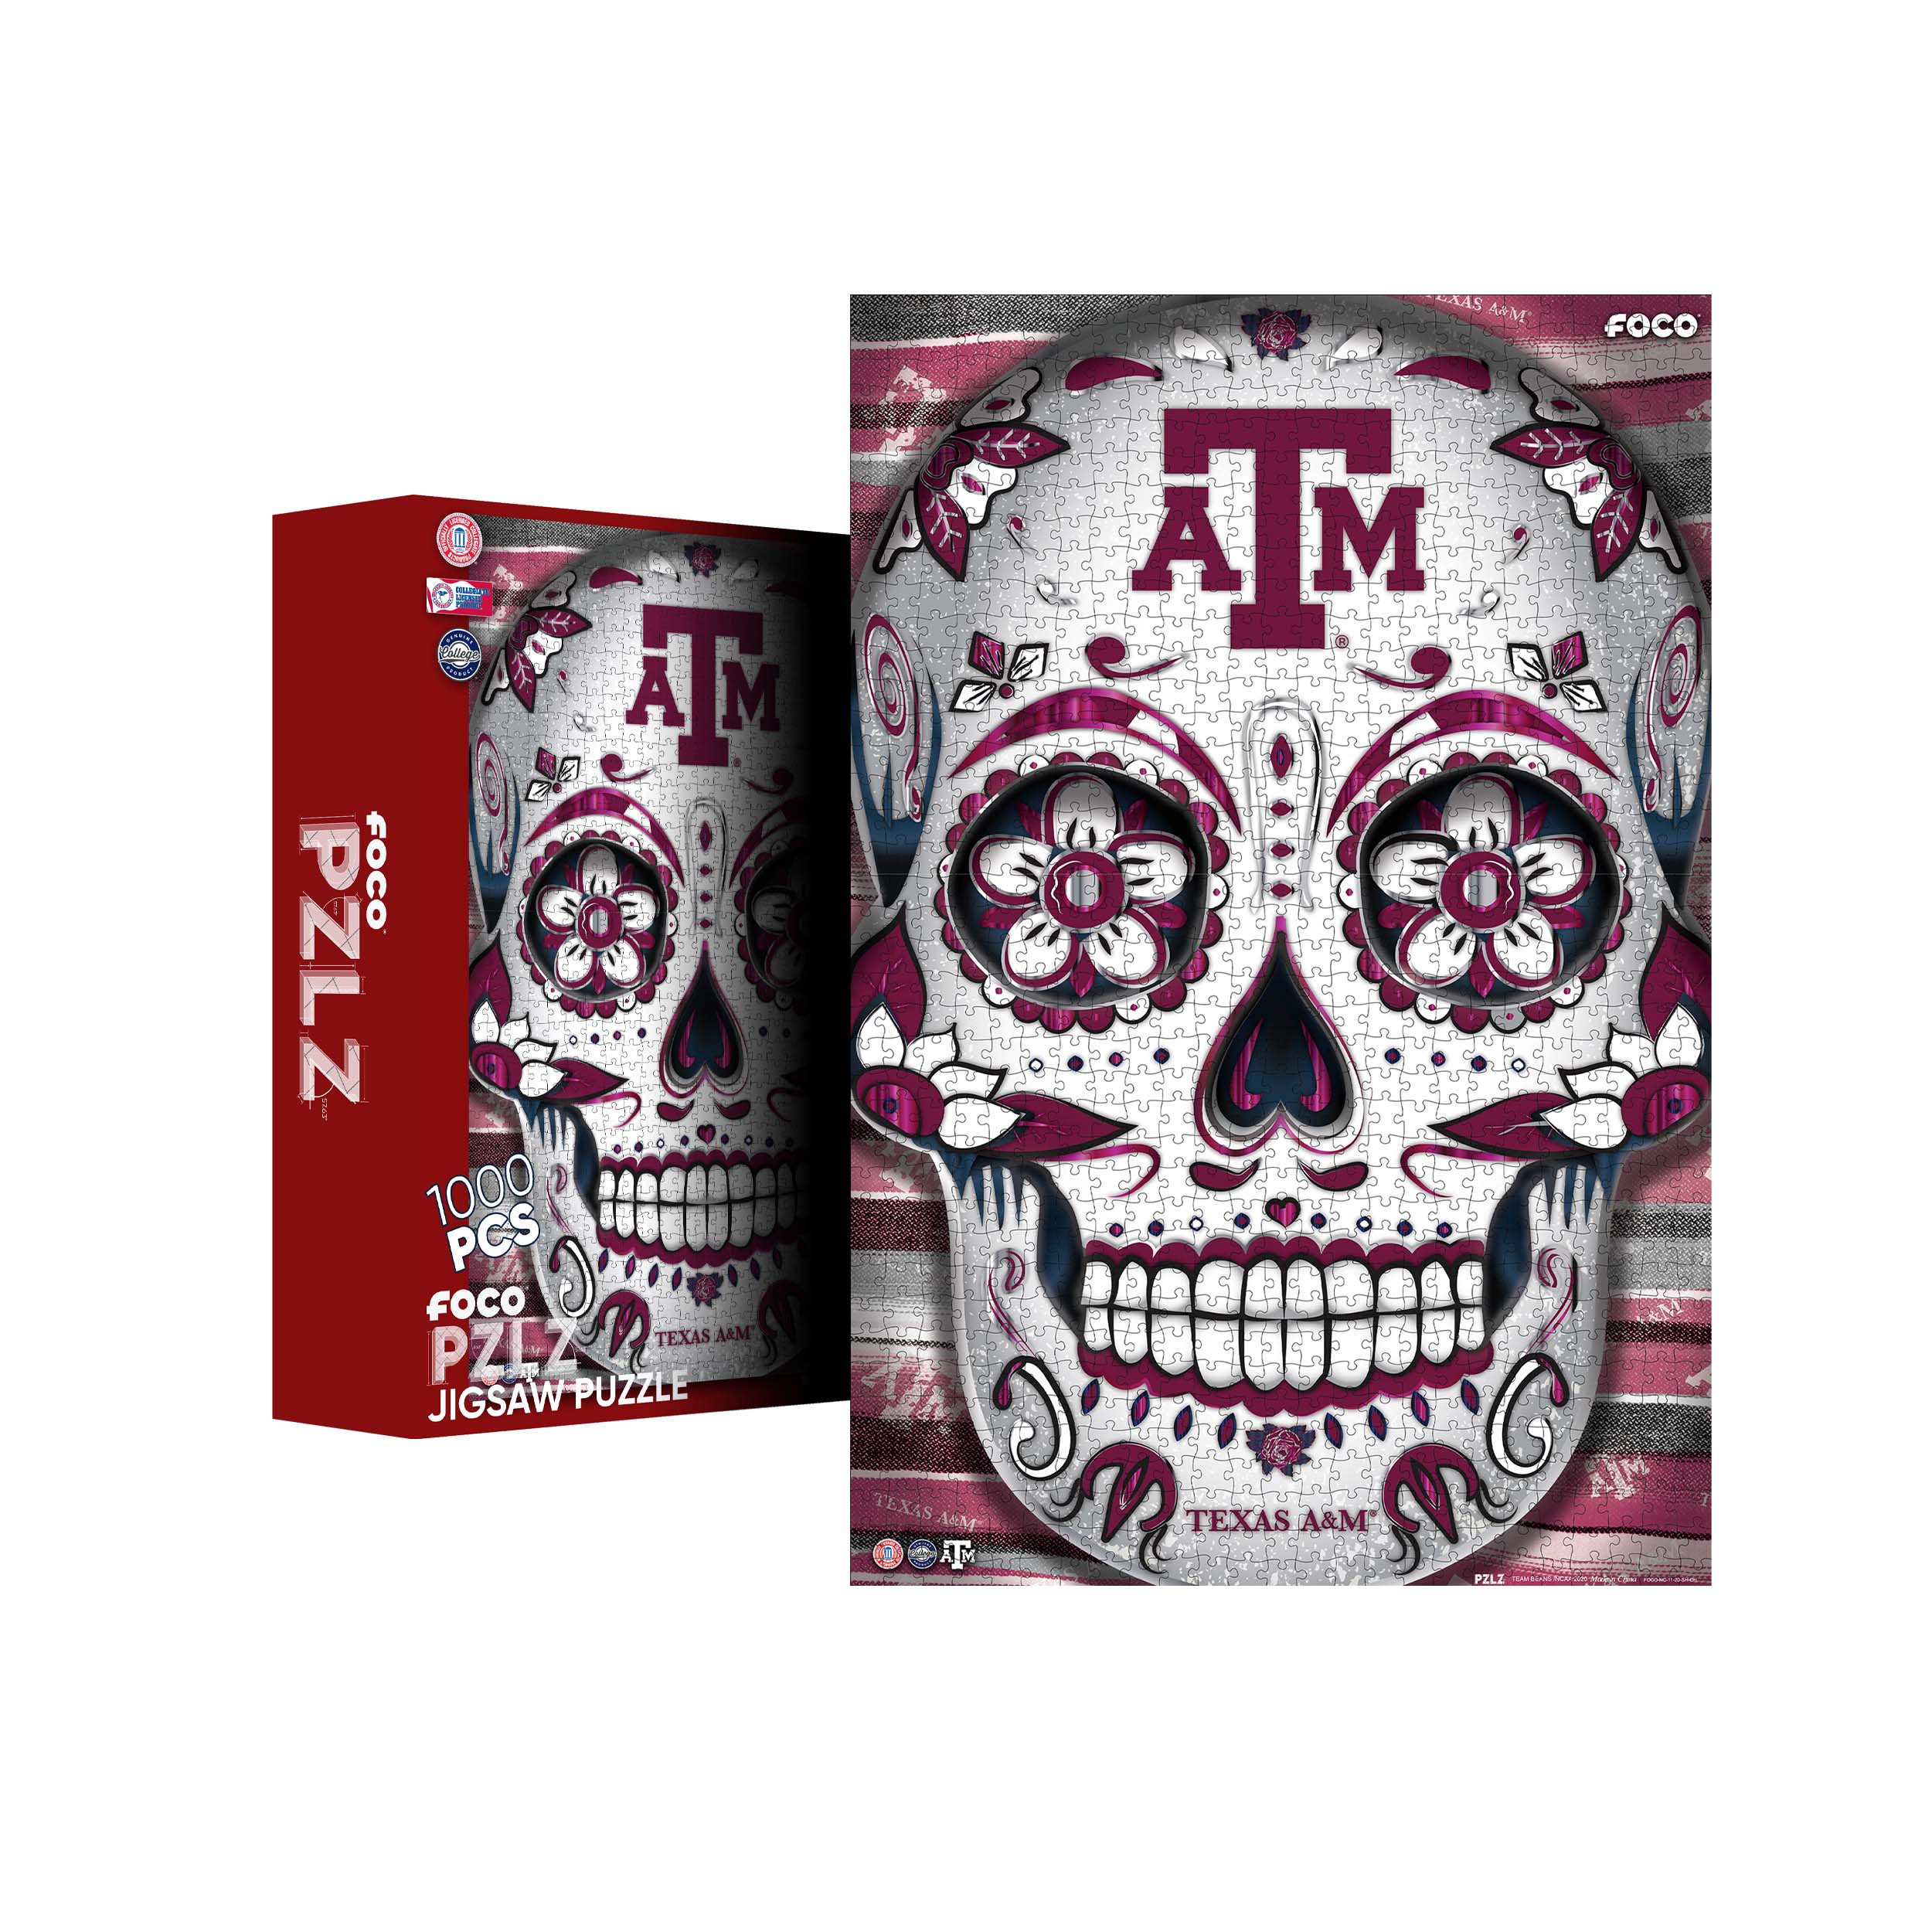 Chicago White Sox Sugar Skull 1000 Piece Jigsaw Puzzle PZLZ 3D Puzzle Officially Licensed by MLB